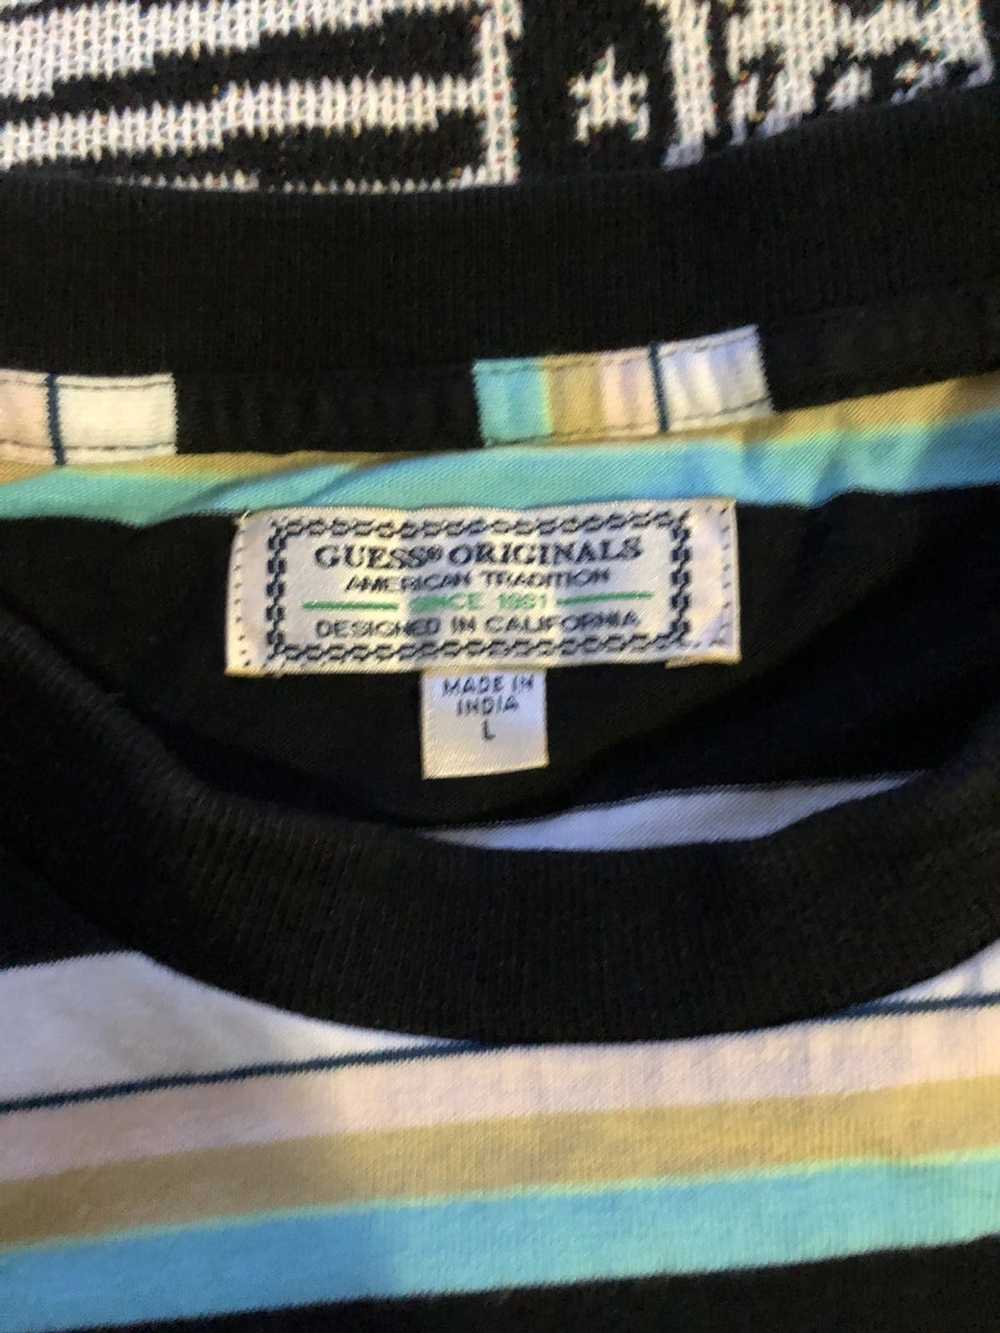 Guess Guess Jeans Black Blue White Striped - image 2